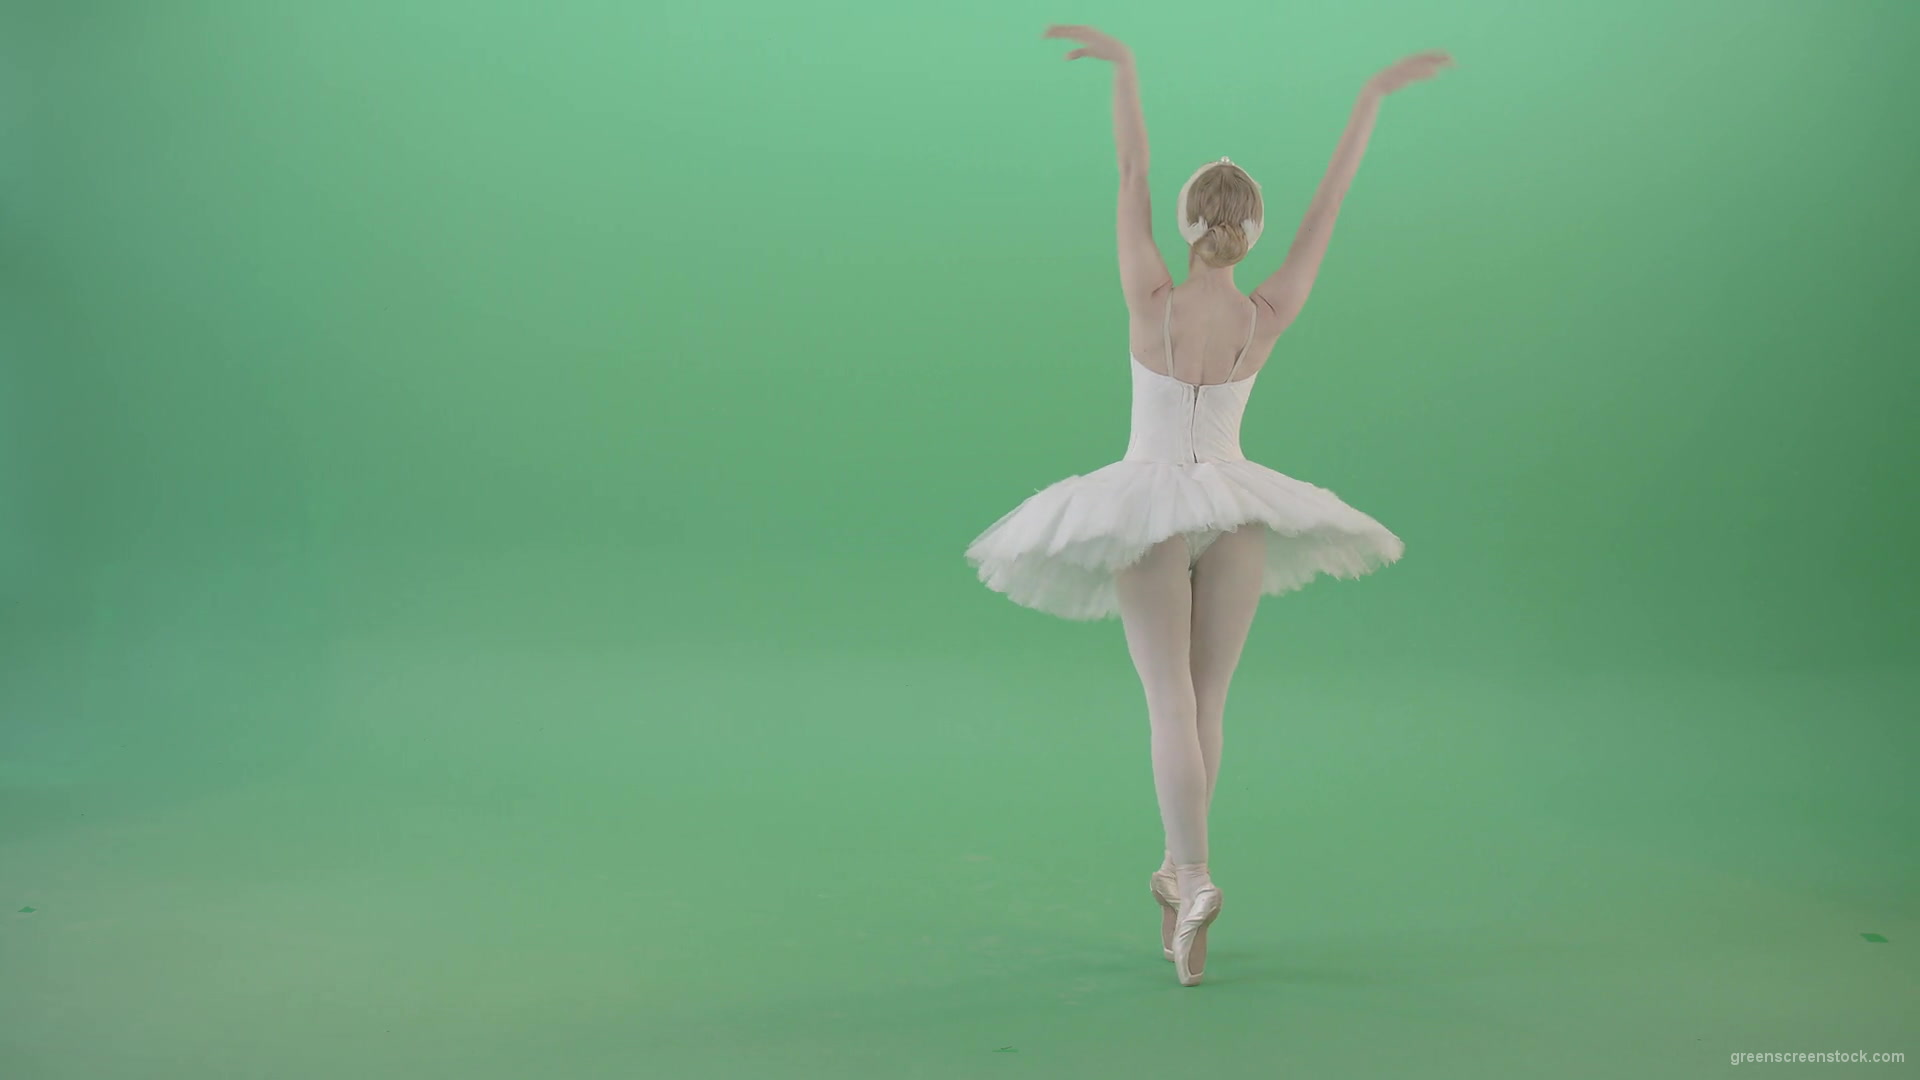 Luxury-ballet-girl-ballerina-flying-in-the-sky-and-waving-hands-on-green-screen-4K-Video-Footage-1920_009 Green Screen Stock